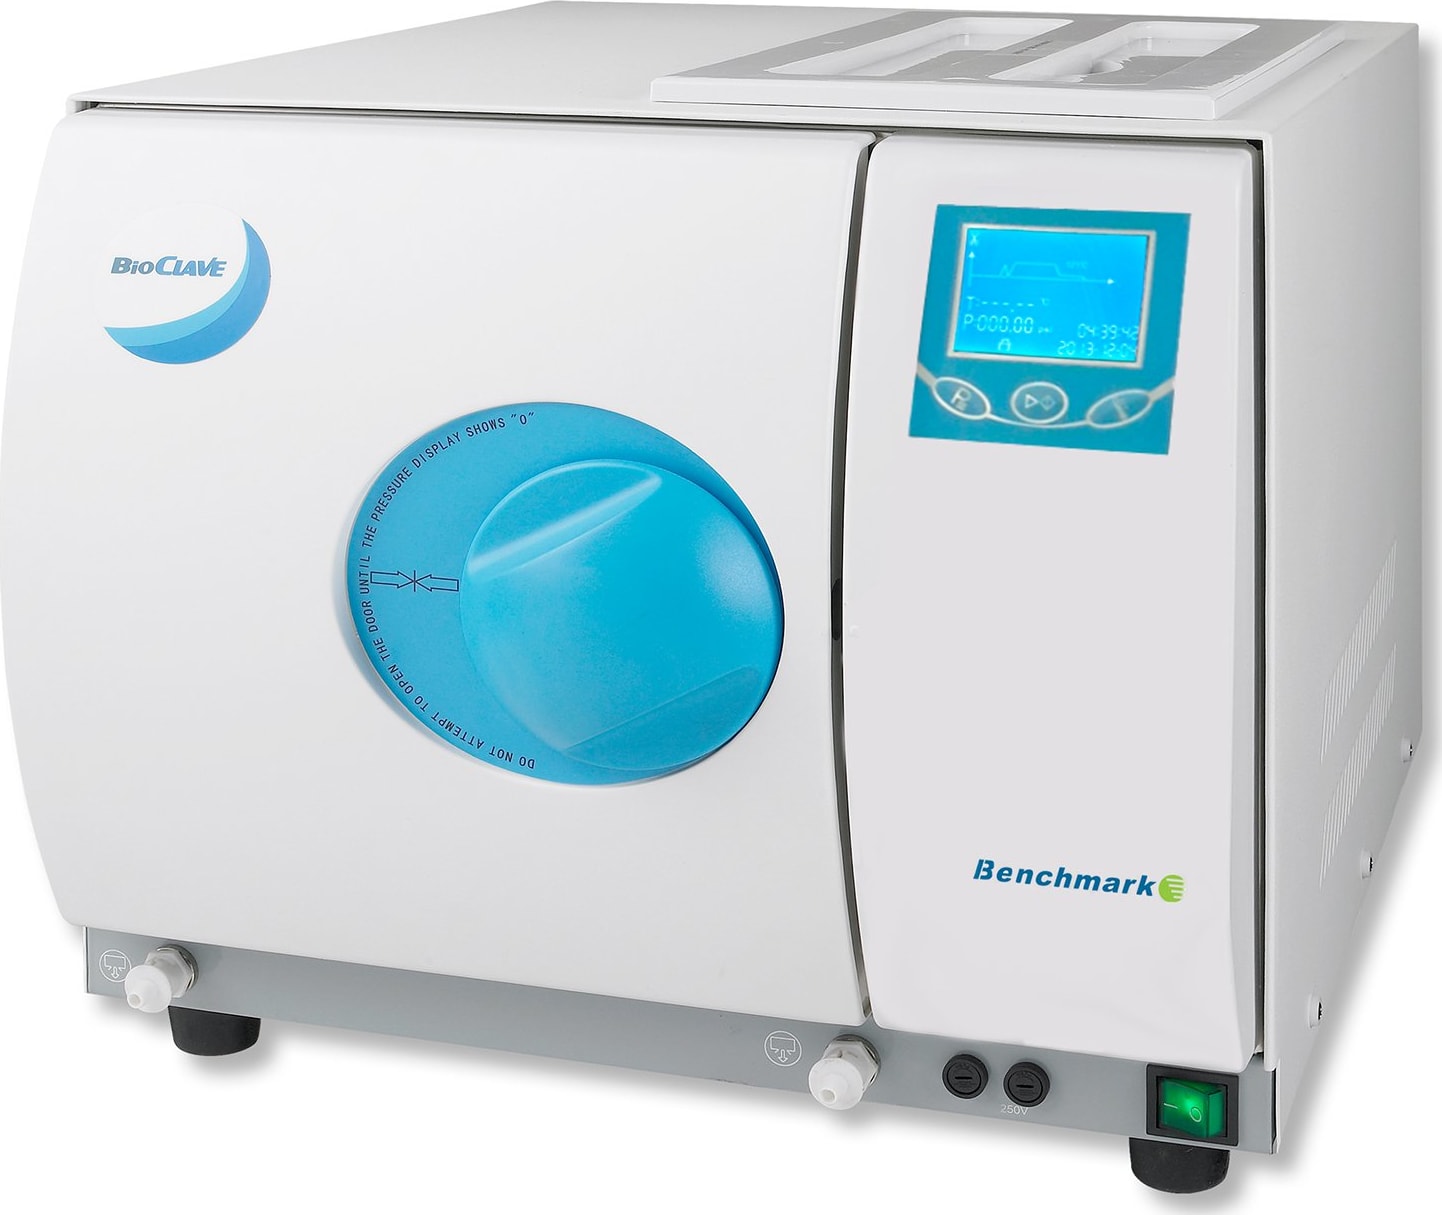 Benchmark BioCLAVE 16 Fully Automatic Research Autoclave